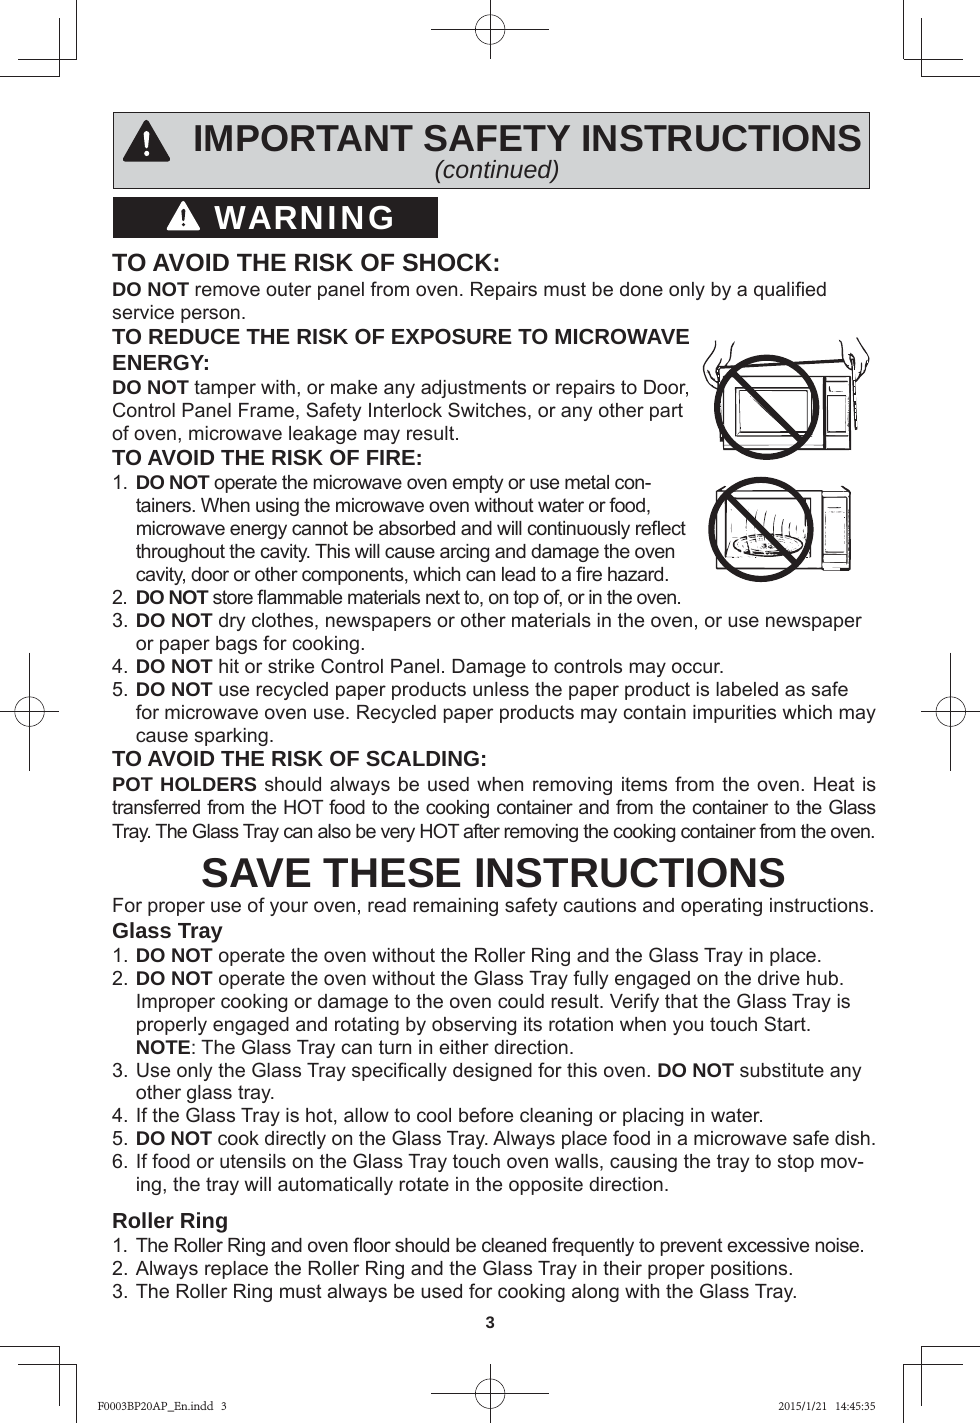 3WARNINGIMPORTANT SAFETY INSTRUCTIONS(continued)TO AVOID THE RISK OF SHOCK:DO NOT remove outer panel from oven. Repairs must be done only by a qualiﬁ ed service person.TO REDUCE THE RISK OF EXPOSURE TO MICROWAVE ENERGY:DO NOT tamper with, or make any adjustments or repairs to Door, Control Panel Frame, Safety Interlock Switches, or any other part of oven, microwave leakage may result.TO AVOID THE RISK OF FIRE:1.  DO NOT operate the microwave oven empty or use metal con-tainers. When using the microwave oven without water or food, microwave energy cannot be absorbed and will continuously reﬂ ect throughout the cavity. This will cause arcing and damage the oven cavity, door or other components, which can lead to a ﬁ re hazard.2.  DO NOT store ﬂ ammable materials next to, on top of, or in the oven.3. DO NOT dry clothes, newspapers or other materials in the oven, or use newspaper or paper bags for cooking.4. DO NOT hit or strike Control Panel. Damage to controls may occur.5. DO NOT use recycled paper products unless the paper product is labeled as safe for microwave oven use. Recycled paper products may contain impurities which may cause sparking.TO AVOID THE RISK OF SCALDING:POT HOLDERS should always be used when removing items from the oven. Heat is transferred from the HOT food to the cooking container and from the container to the Glass Tray. The Glass Tray can also be very HOT after removing the cooking container from the oven. SAVE THESE INSTRUCTIONSFor proper use of your oven, read remaining safety cautions and operating instructions.Glass Tray1. DO NOT operate the oven without the Roller Ring and the Glass Tray in place.2. DO NOT operate the oven without the Glass Tray fully engaged on the drive hub. Improper cooking or damage to the oven could result. Verify that the Glass Tray is properly engaged and rotating by observing its rotation when you touch Start. NOTE: The Glass Tray can turn in either direction.3. Use only the Glass Tray speciﬁ cally designed for this oven. DO NOT substitute any other glass tray.4. If the Glass Tray is hot, allow to cool before cleaning or placing in water.5. DO NOT cook directly on the Glass Tray. Always place food in a microwave safe dish.6. If food or utensils on the Glass Tray touch oven walls, causing the tray to stop mov-ing, the tray will automatically rotate in the opposite direction.Roller Ring1.  The Roller Ring and oven ﬂ oor should be cleaned frequently to prevent excessive noise.2. Always replace the Roller Ring and the Glass Tray in their proper positions.3. The Roller Ring must always be used for cooking along with the Glass Tray.F0003BP20AP_En.indd   3F0003BP20AP_En.indd   3 2015/1/21   14:45:352015/1/21   14:45:35